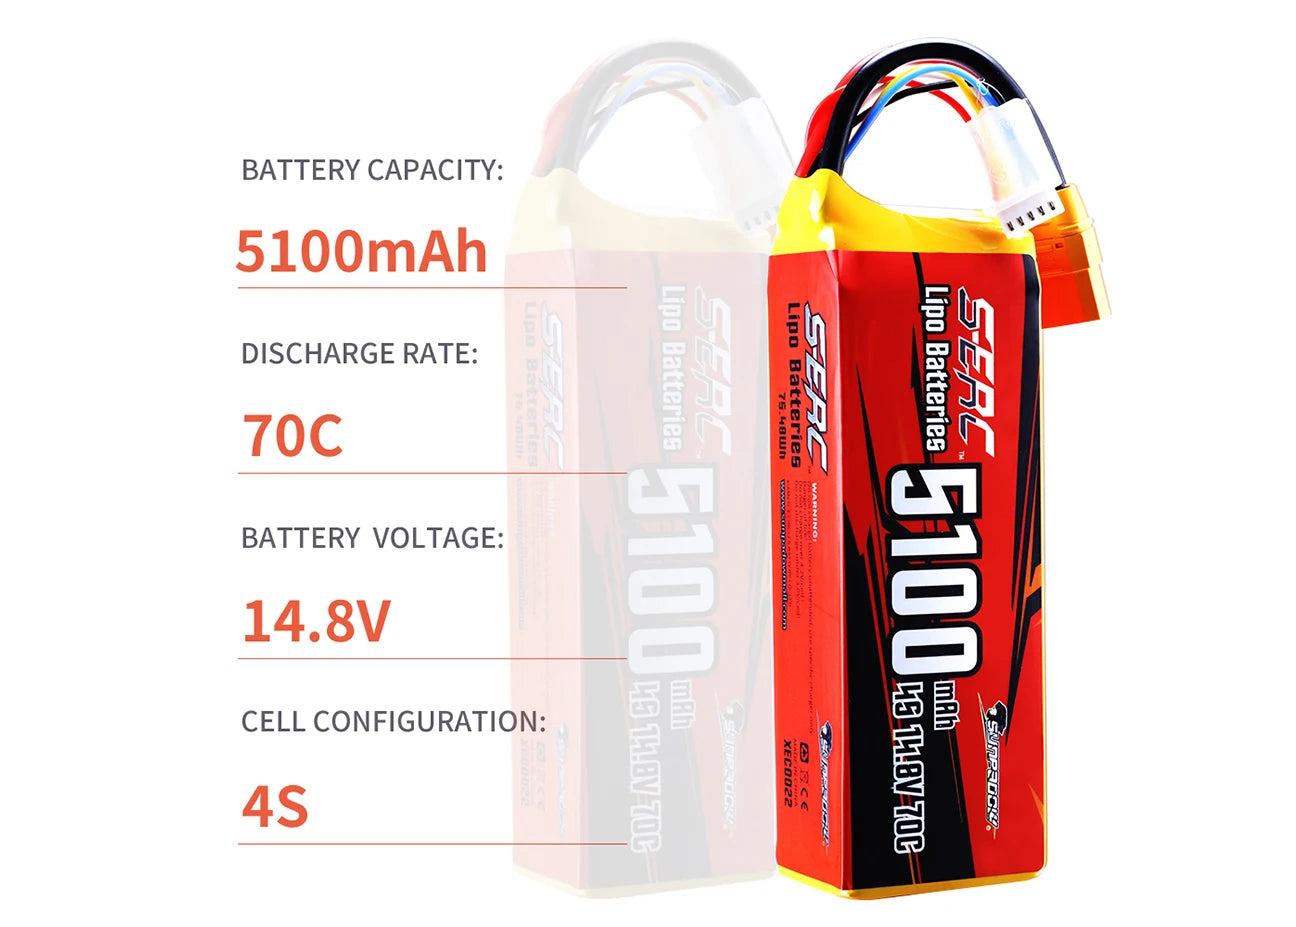 Sunpadow RC 3S 4S 6S Lipo Battery 5100mAh, 4.If the new battery won’t hold a full charge or loss the charge very quickly